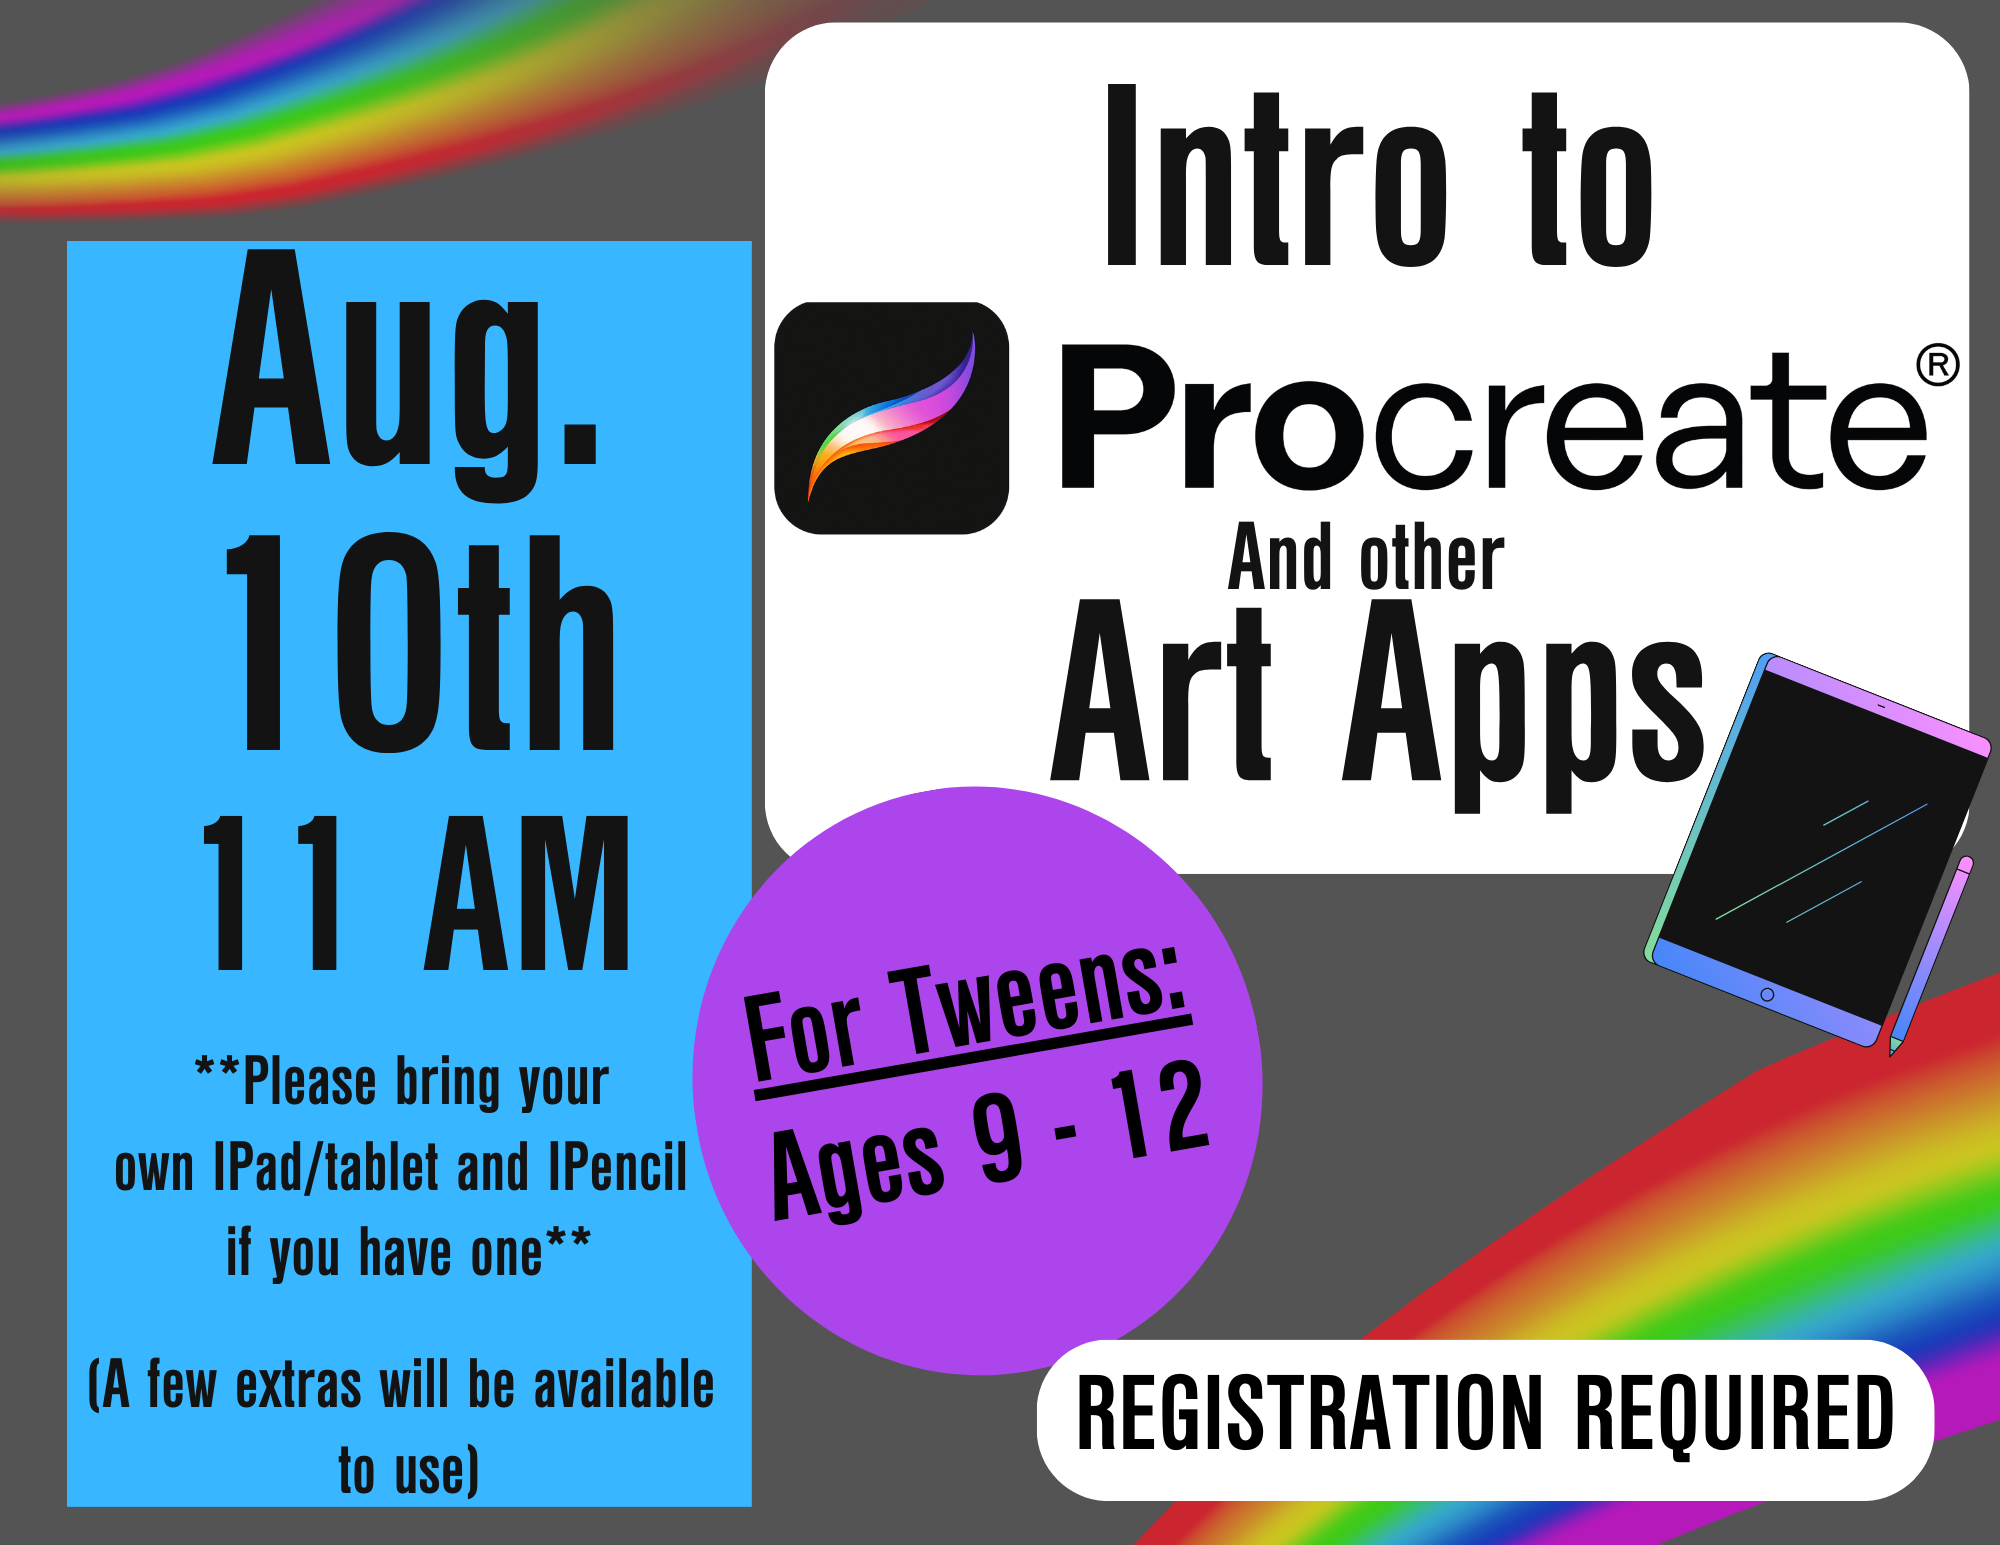 Intro to Procreate and other Art Apps Aug. 10th 11 AM, for Tweens: Ages 9-12 Please bring an Ipad/tablet and an IPencil if you have one, a few will be available to use